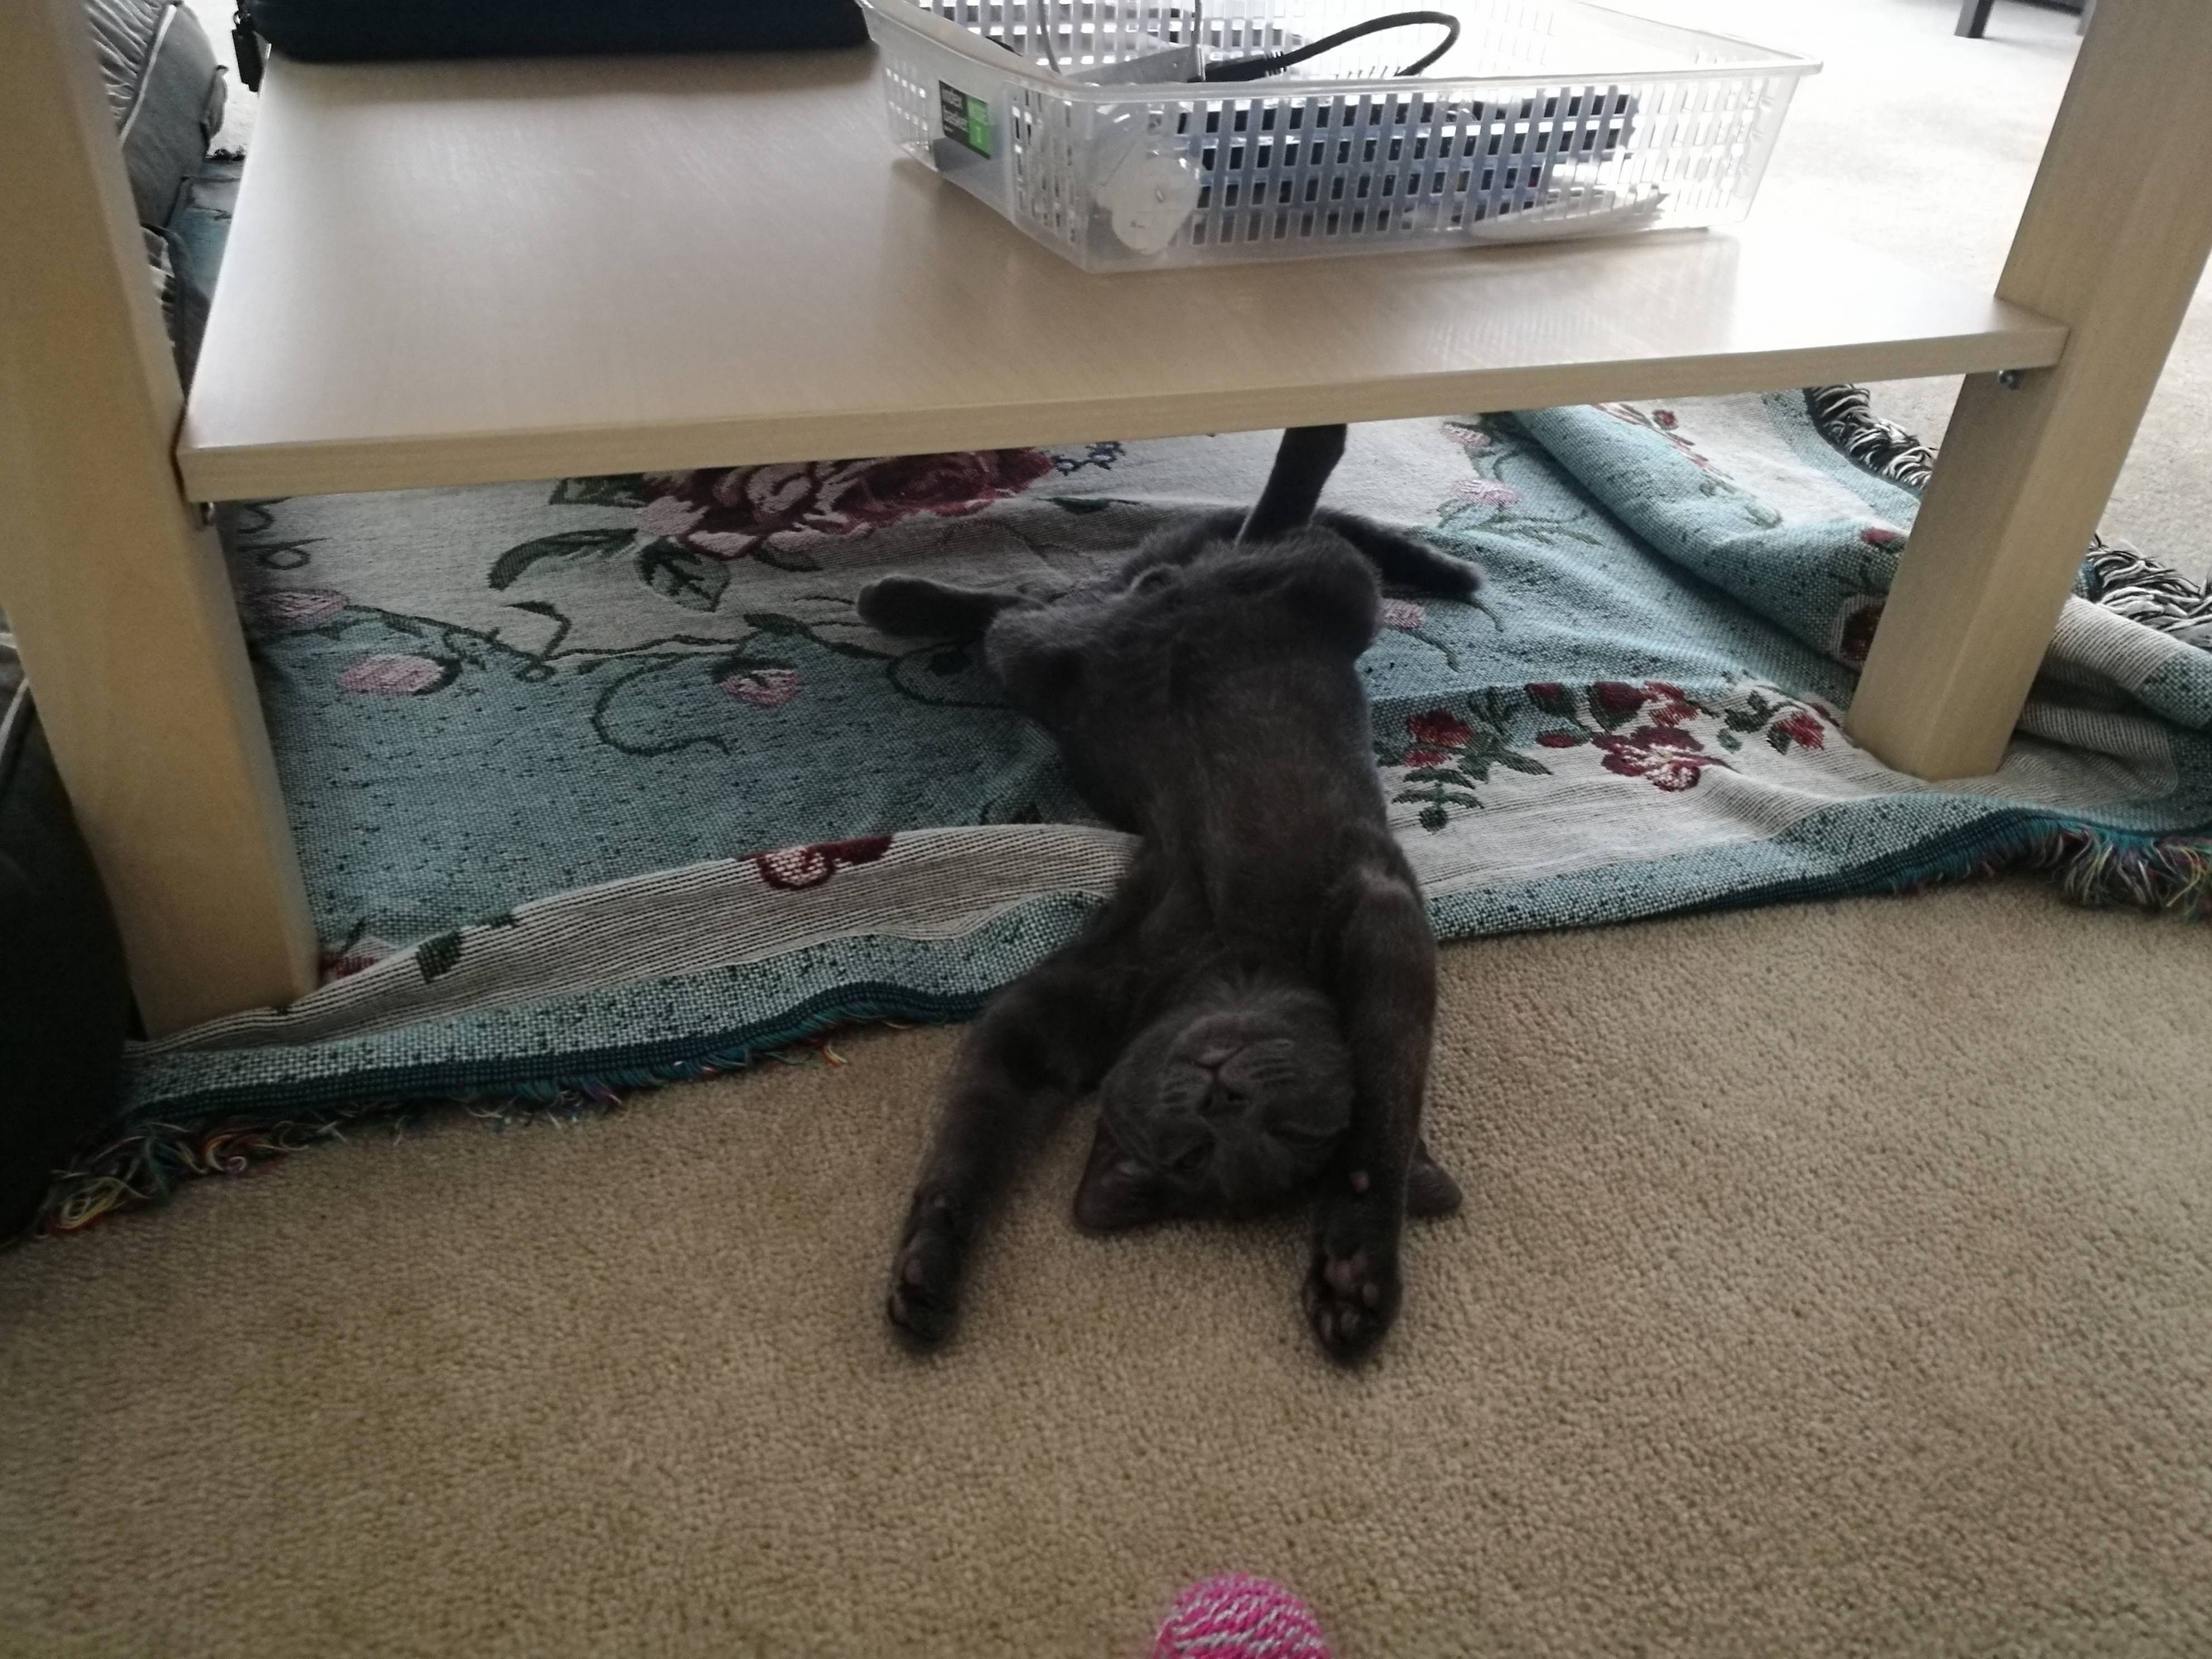 When she gets tired from all the playing she just flops over and goes to sleep like this